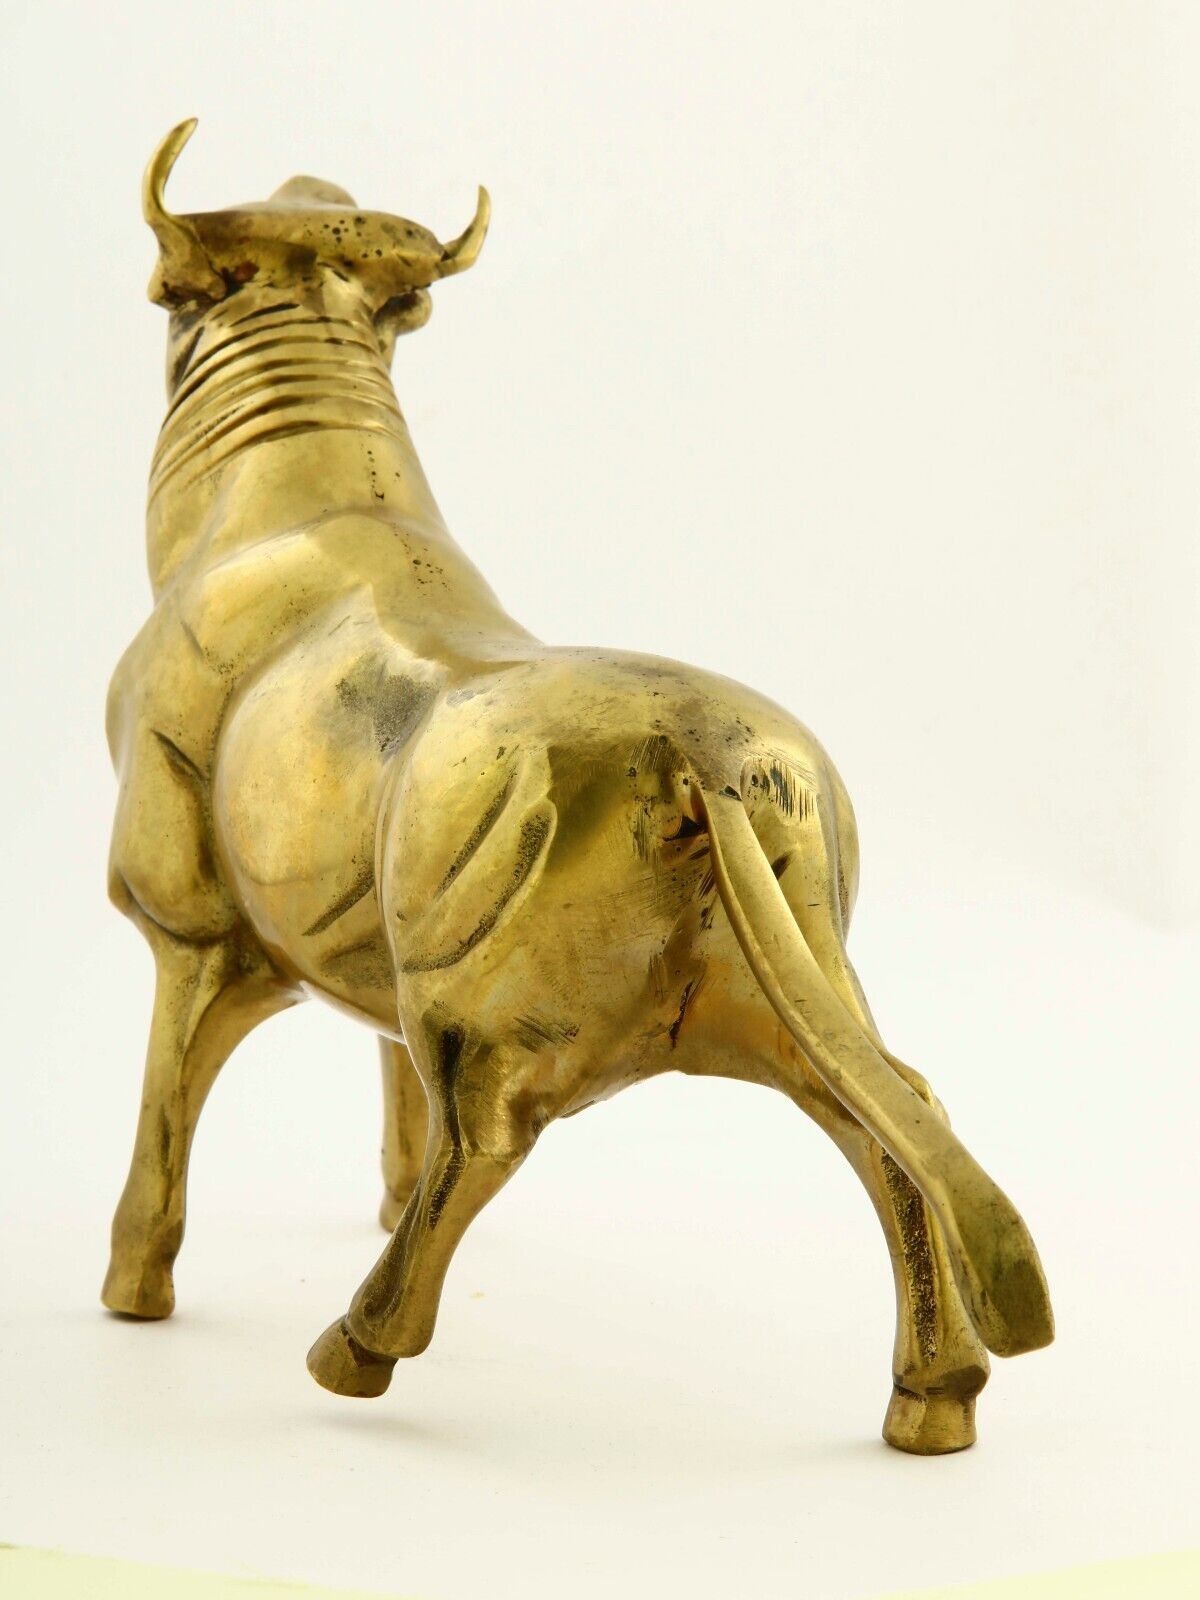 Vintage Statues Solid Brass Bull Figure Heavy Large Cattle Decoration from 1965